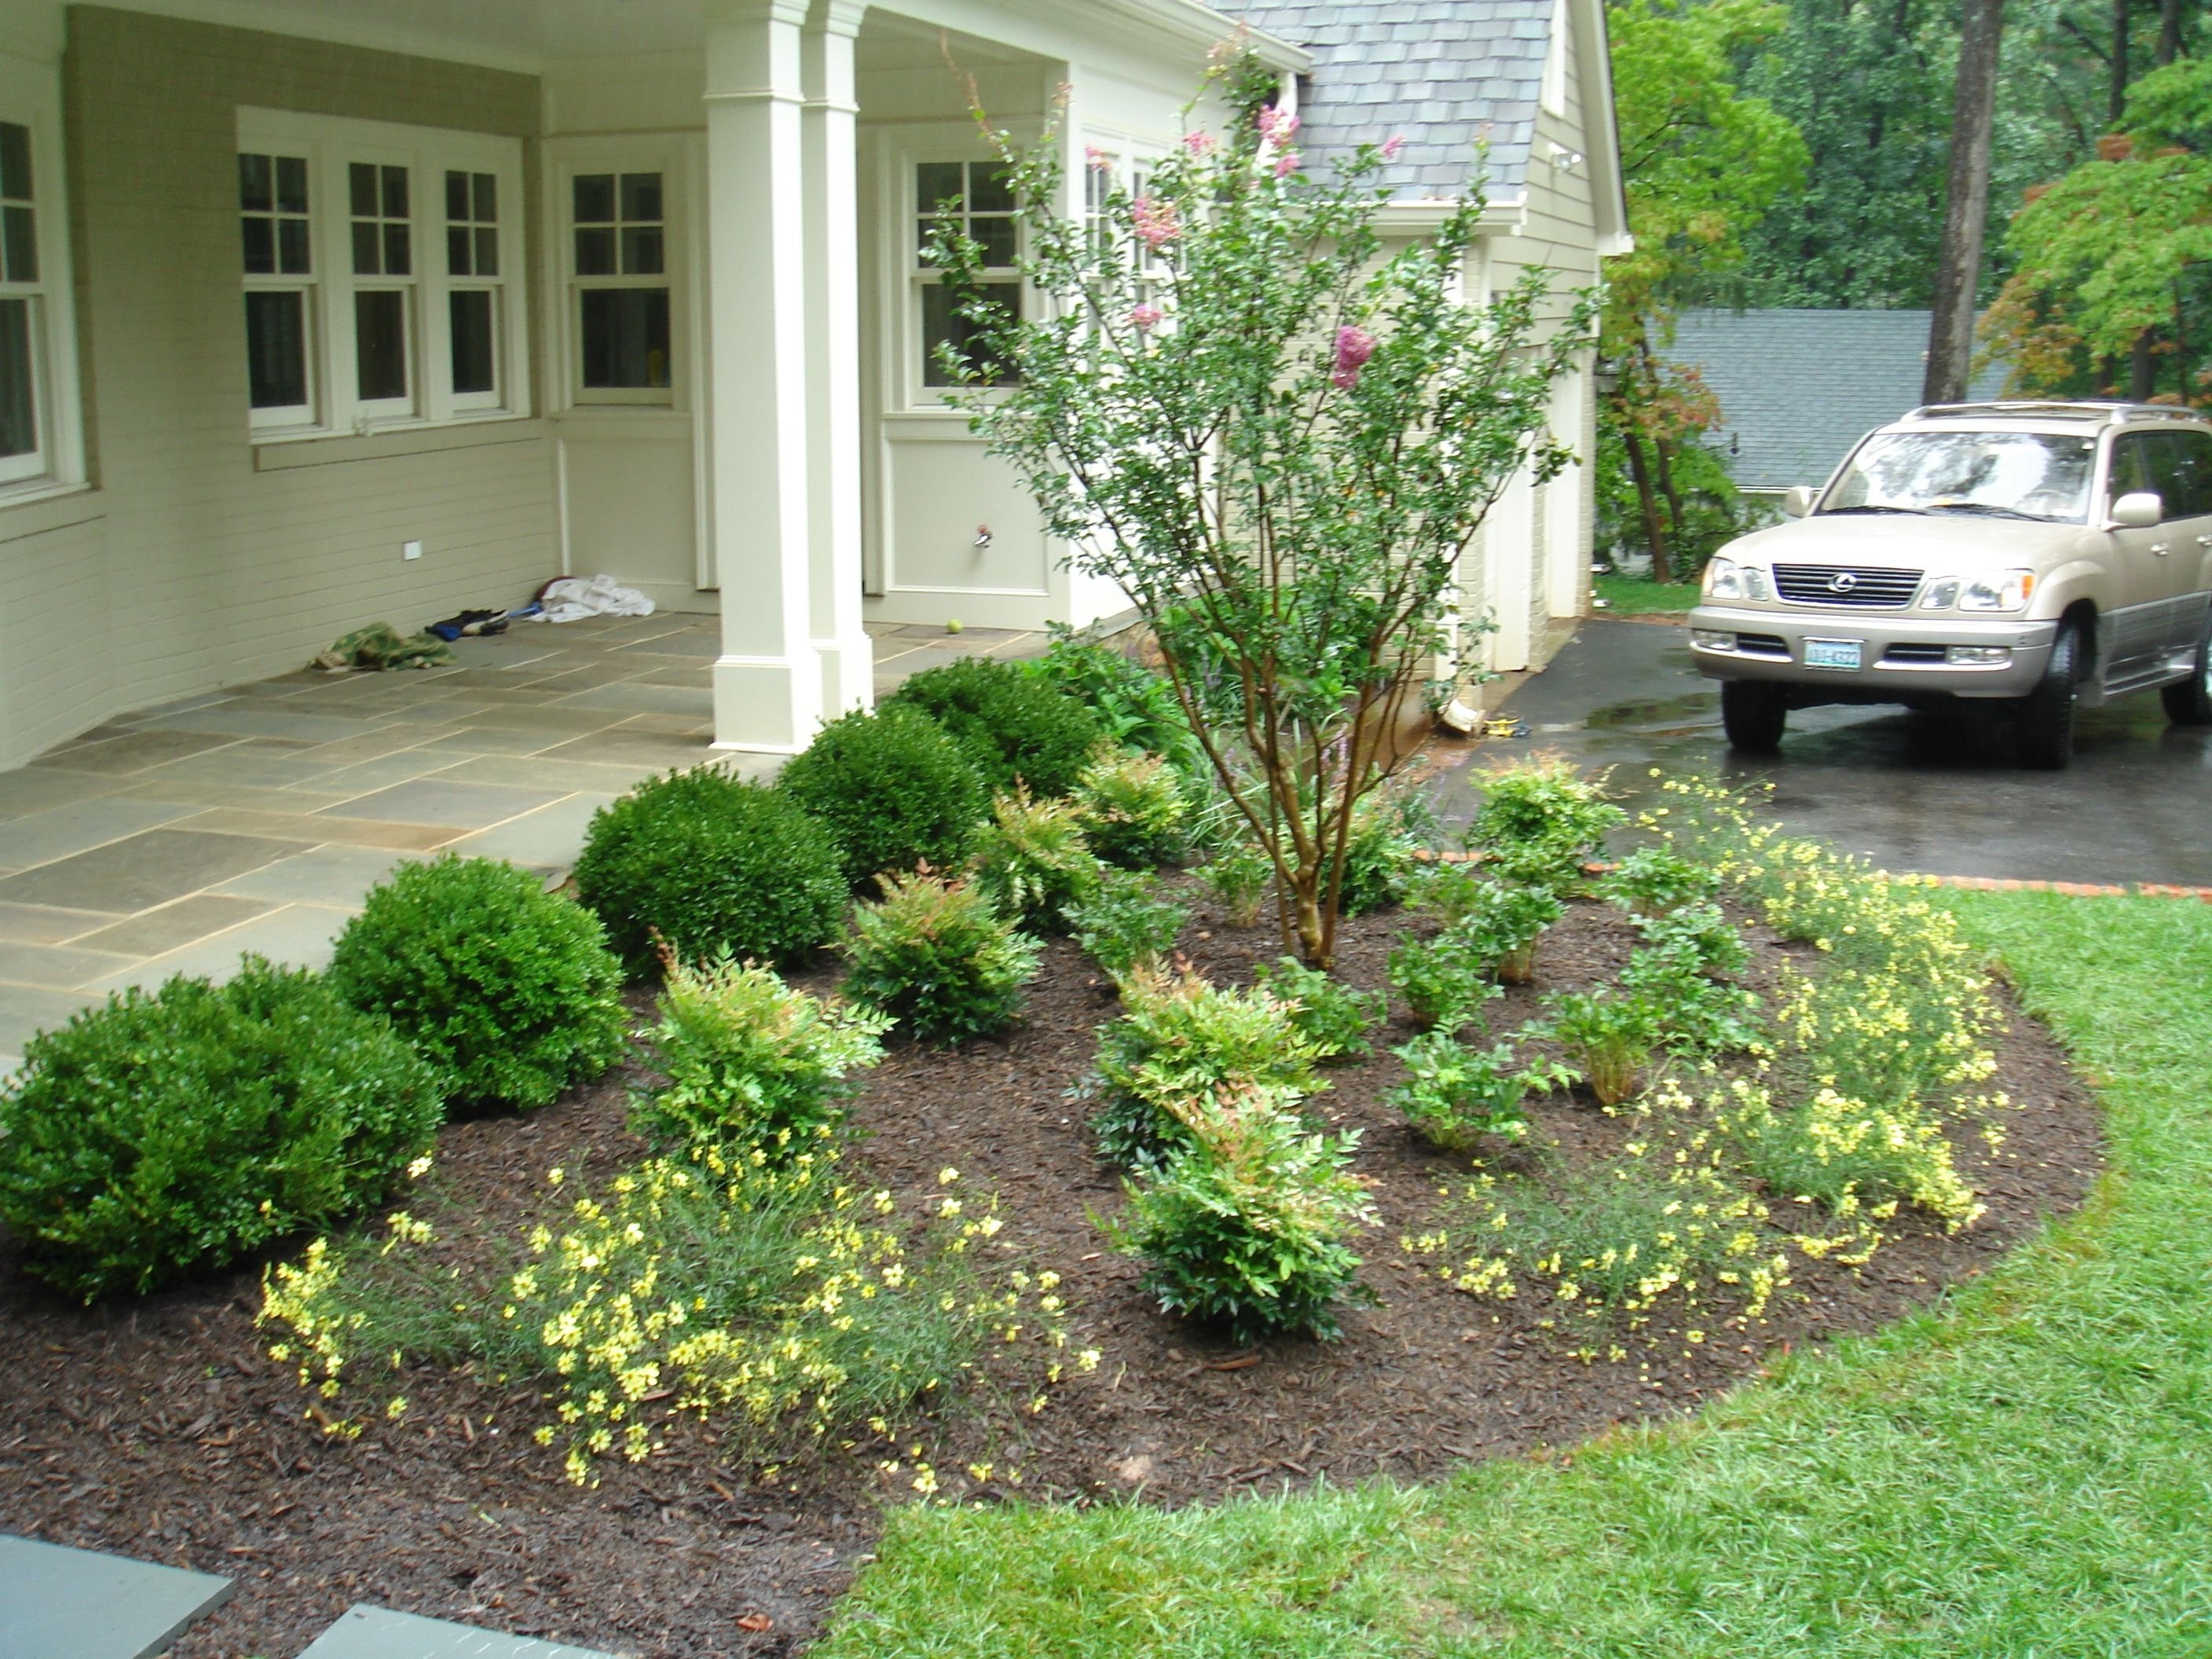 10 Pretty Small Front Yard Landscaping Ideas On A Budget simple front yard landscaping ideas with trees on a budget love the 2022